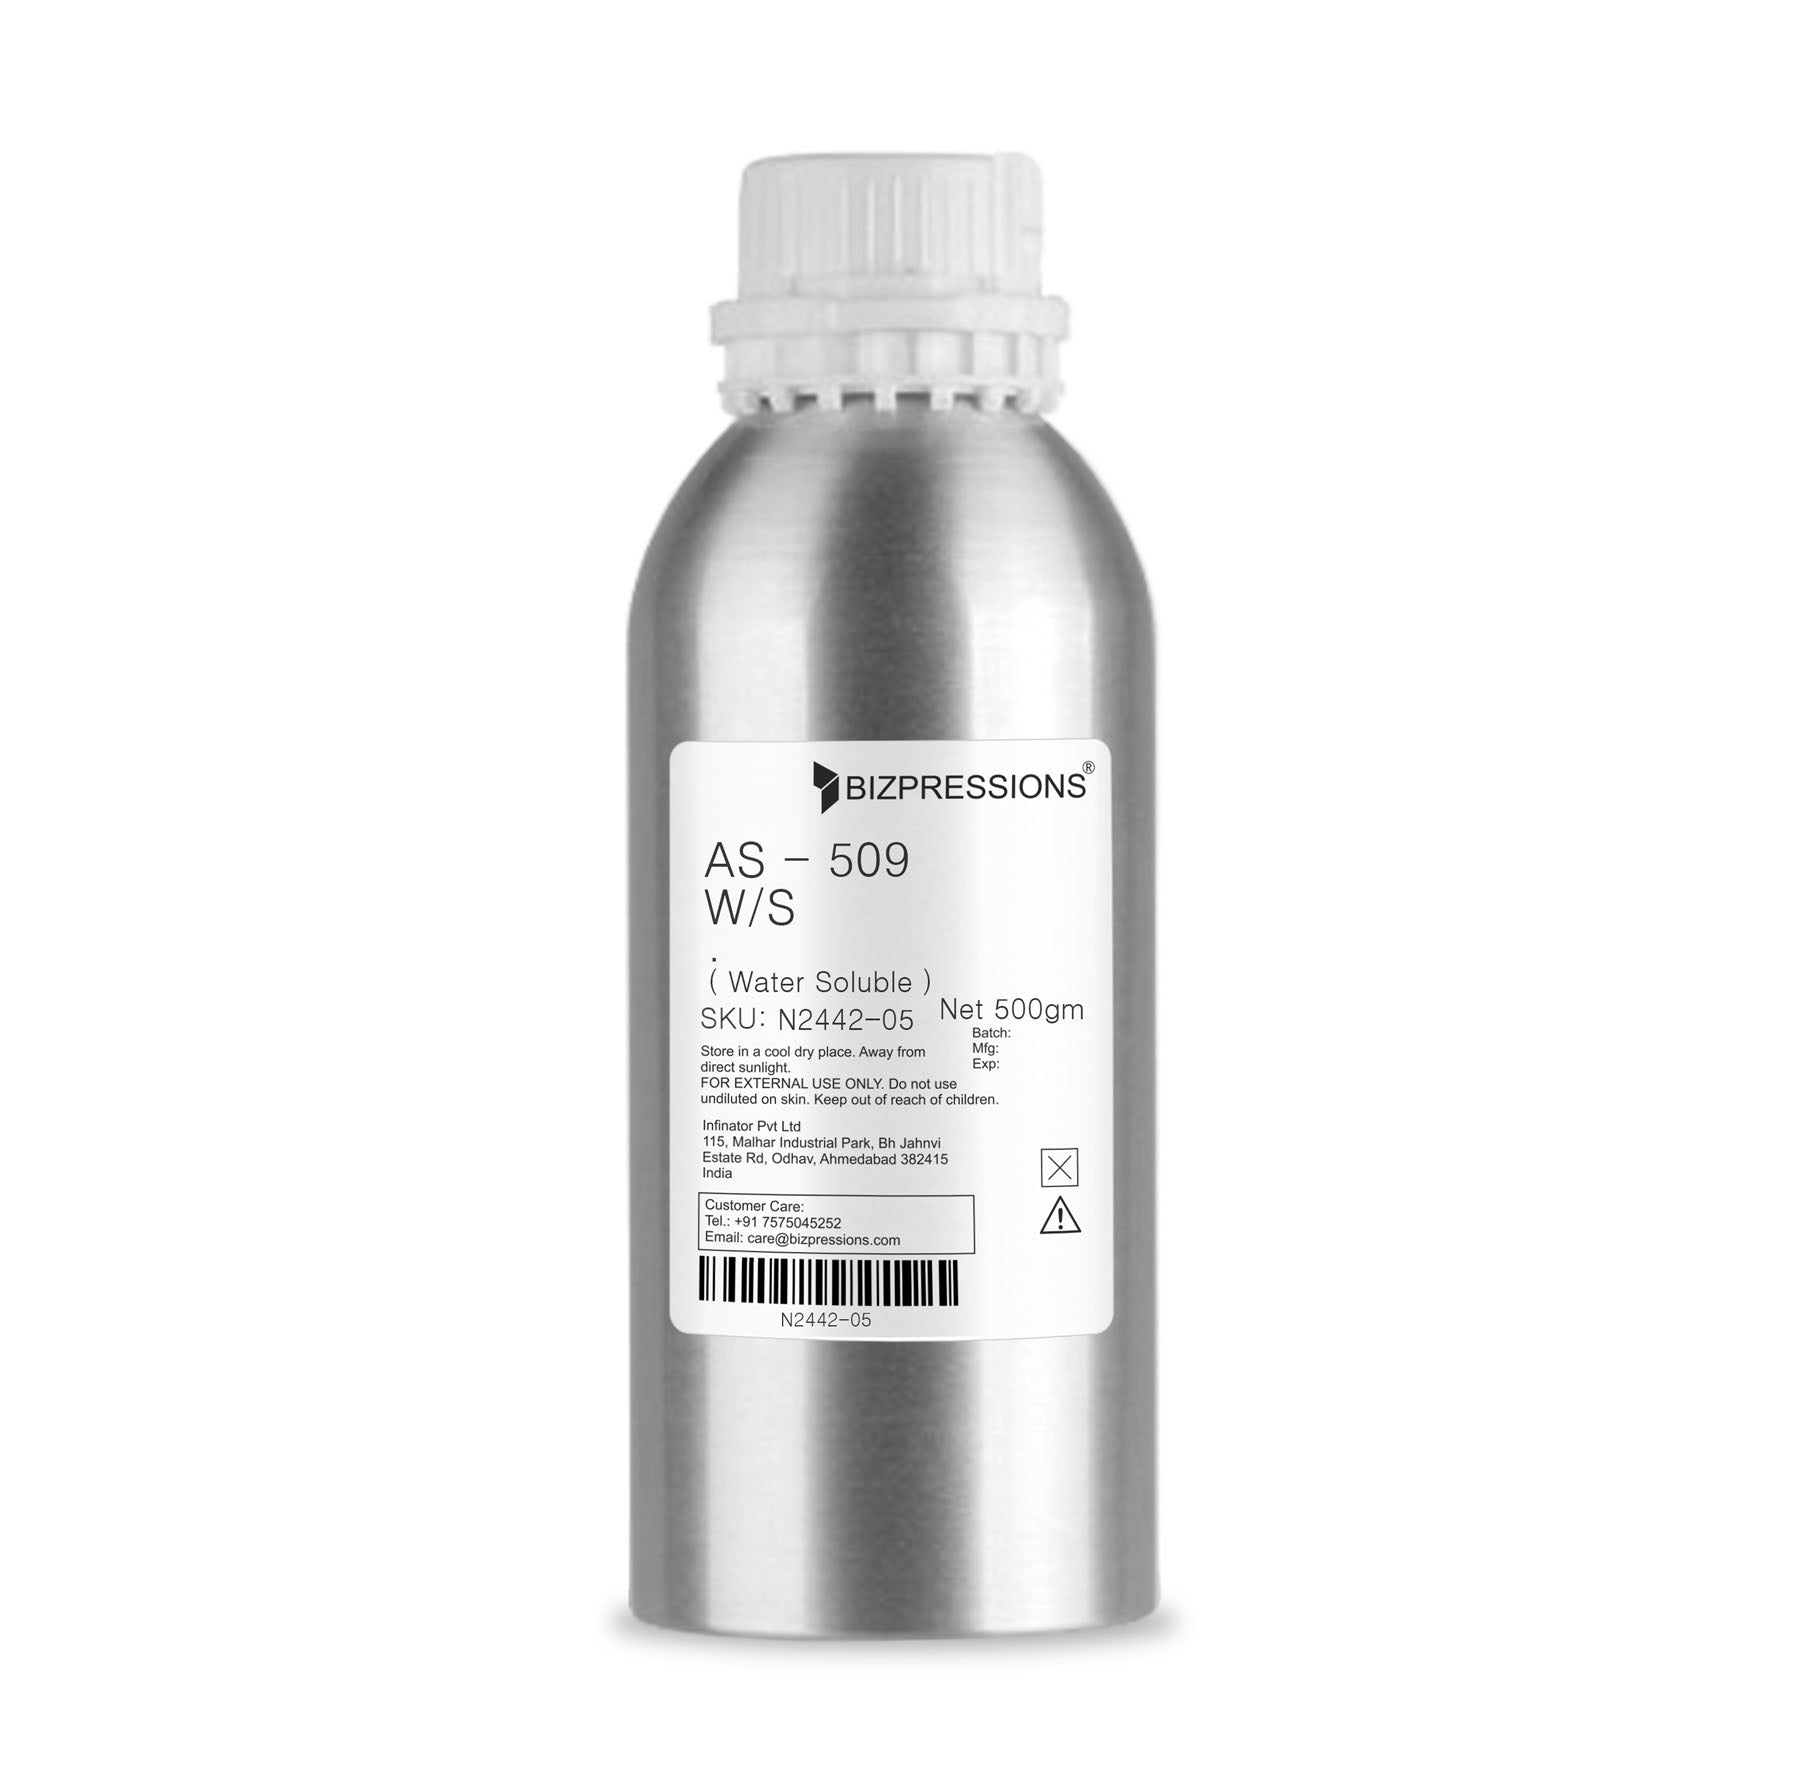 AS - 509 W/S - Fragrance ( Water Soluble ) - 500 gm